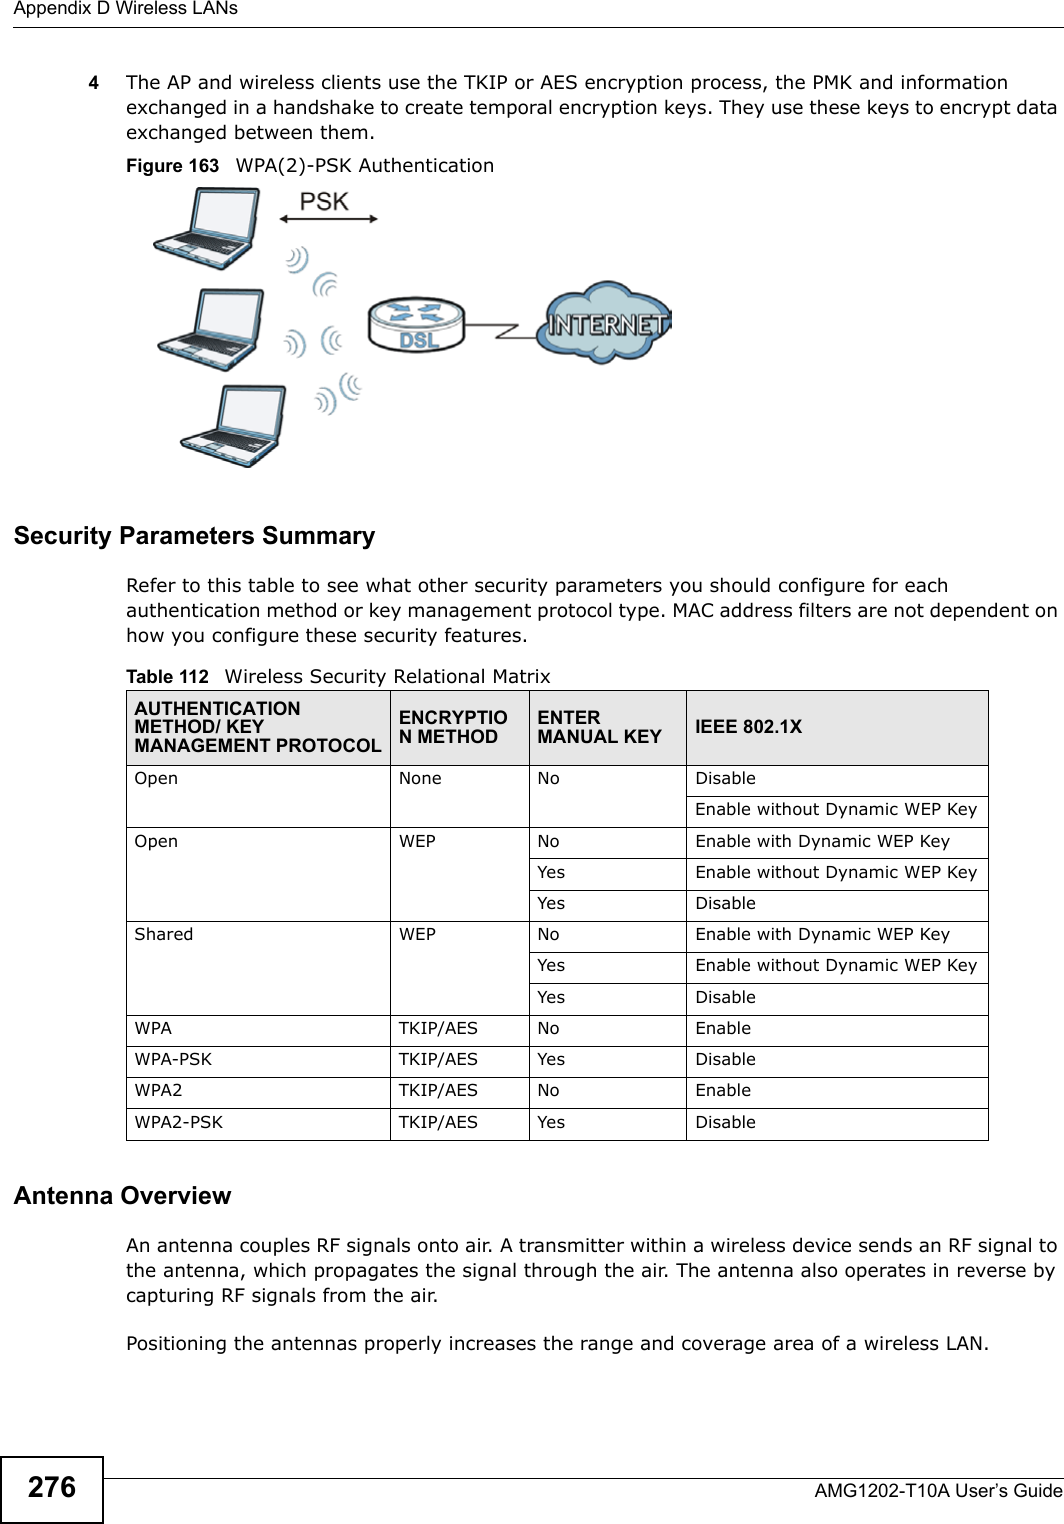 Appendix D Wireless LANsAMG1202-T10A User’s Guide2764The AP and wireless clients use the TKIP or AES encryption process, the PMK and information exchanged in a handshake to create temporal encryption keys. They use these keys to encrypt data exchanged between them.Figure 163   WPA(2)-PSK AuthenticationSecurity Parameters SummaryRefer to this table to see what other security parameters you should configure for each authentication method or key management protocol type. MAC address filters are not dependent on how you configure these security features.Antenna OverviewAn antenna couples RF signals onto air. A transmitter within a wireless device sends an RF signal to the antenna, which propagates the signal through the air. The antenna also operates in reverse by capturing RF signals from the air. Positioning the antennas properly increases the range and coverage area of a wireless LAN. Table 112   Wireless Security Relational MatrixAUTHENTICATION METHOD/ KEY MANAGEMENT PROTOCOLENCRYPTION METHODENTER MANUAL KEY IEEE 802.1XOpen None No DisableEnable without Dynamic WEP KeyOpen WEP No           Enable with Dynamic WEP KeyYes Enable without Dynamic WEP KeyYes DisableShared WEP  No           Enable with Dynamic WEP KeyYes Enable without Dynamic WEP KeyYes DisableWPA  TKIP/AES No EnableWPA-PSK  TKIP/AES Yes DisableWPA2 TKIP/AES No EnableWPA2-PSK  TKIP/AES Yes Disable